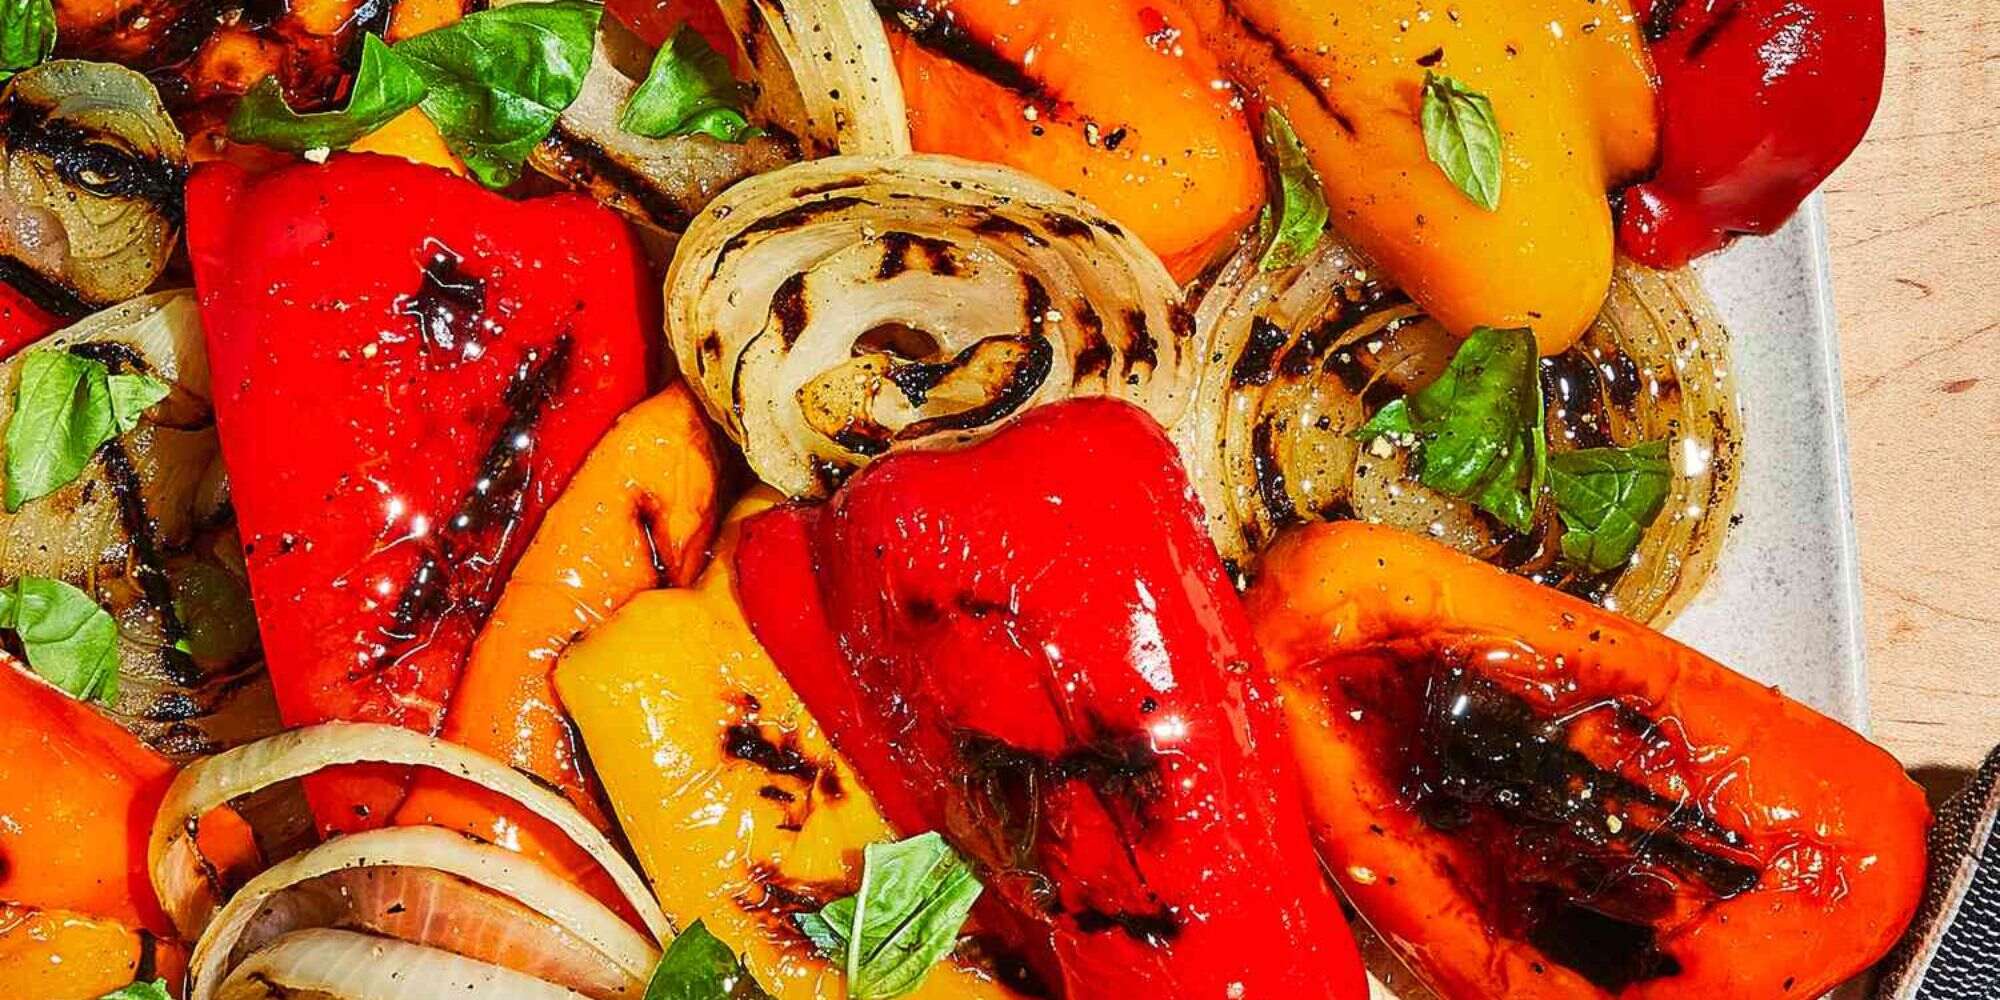 How To Grill Peppers And Onions For Fajitas - Recipes.net